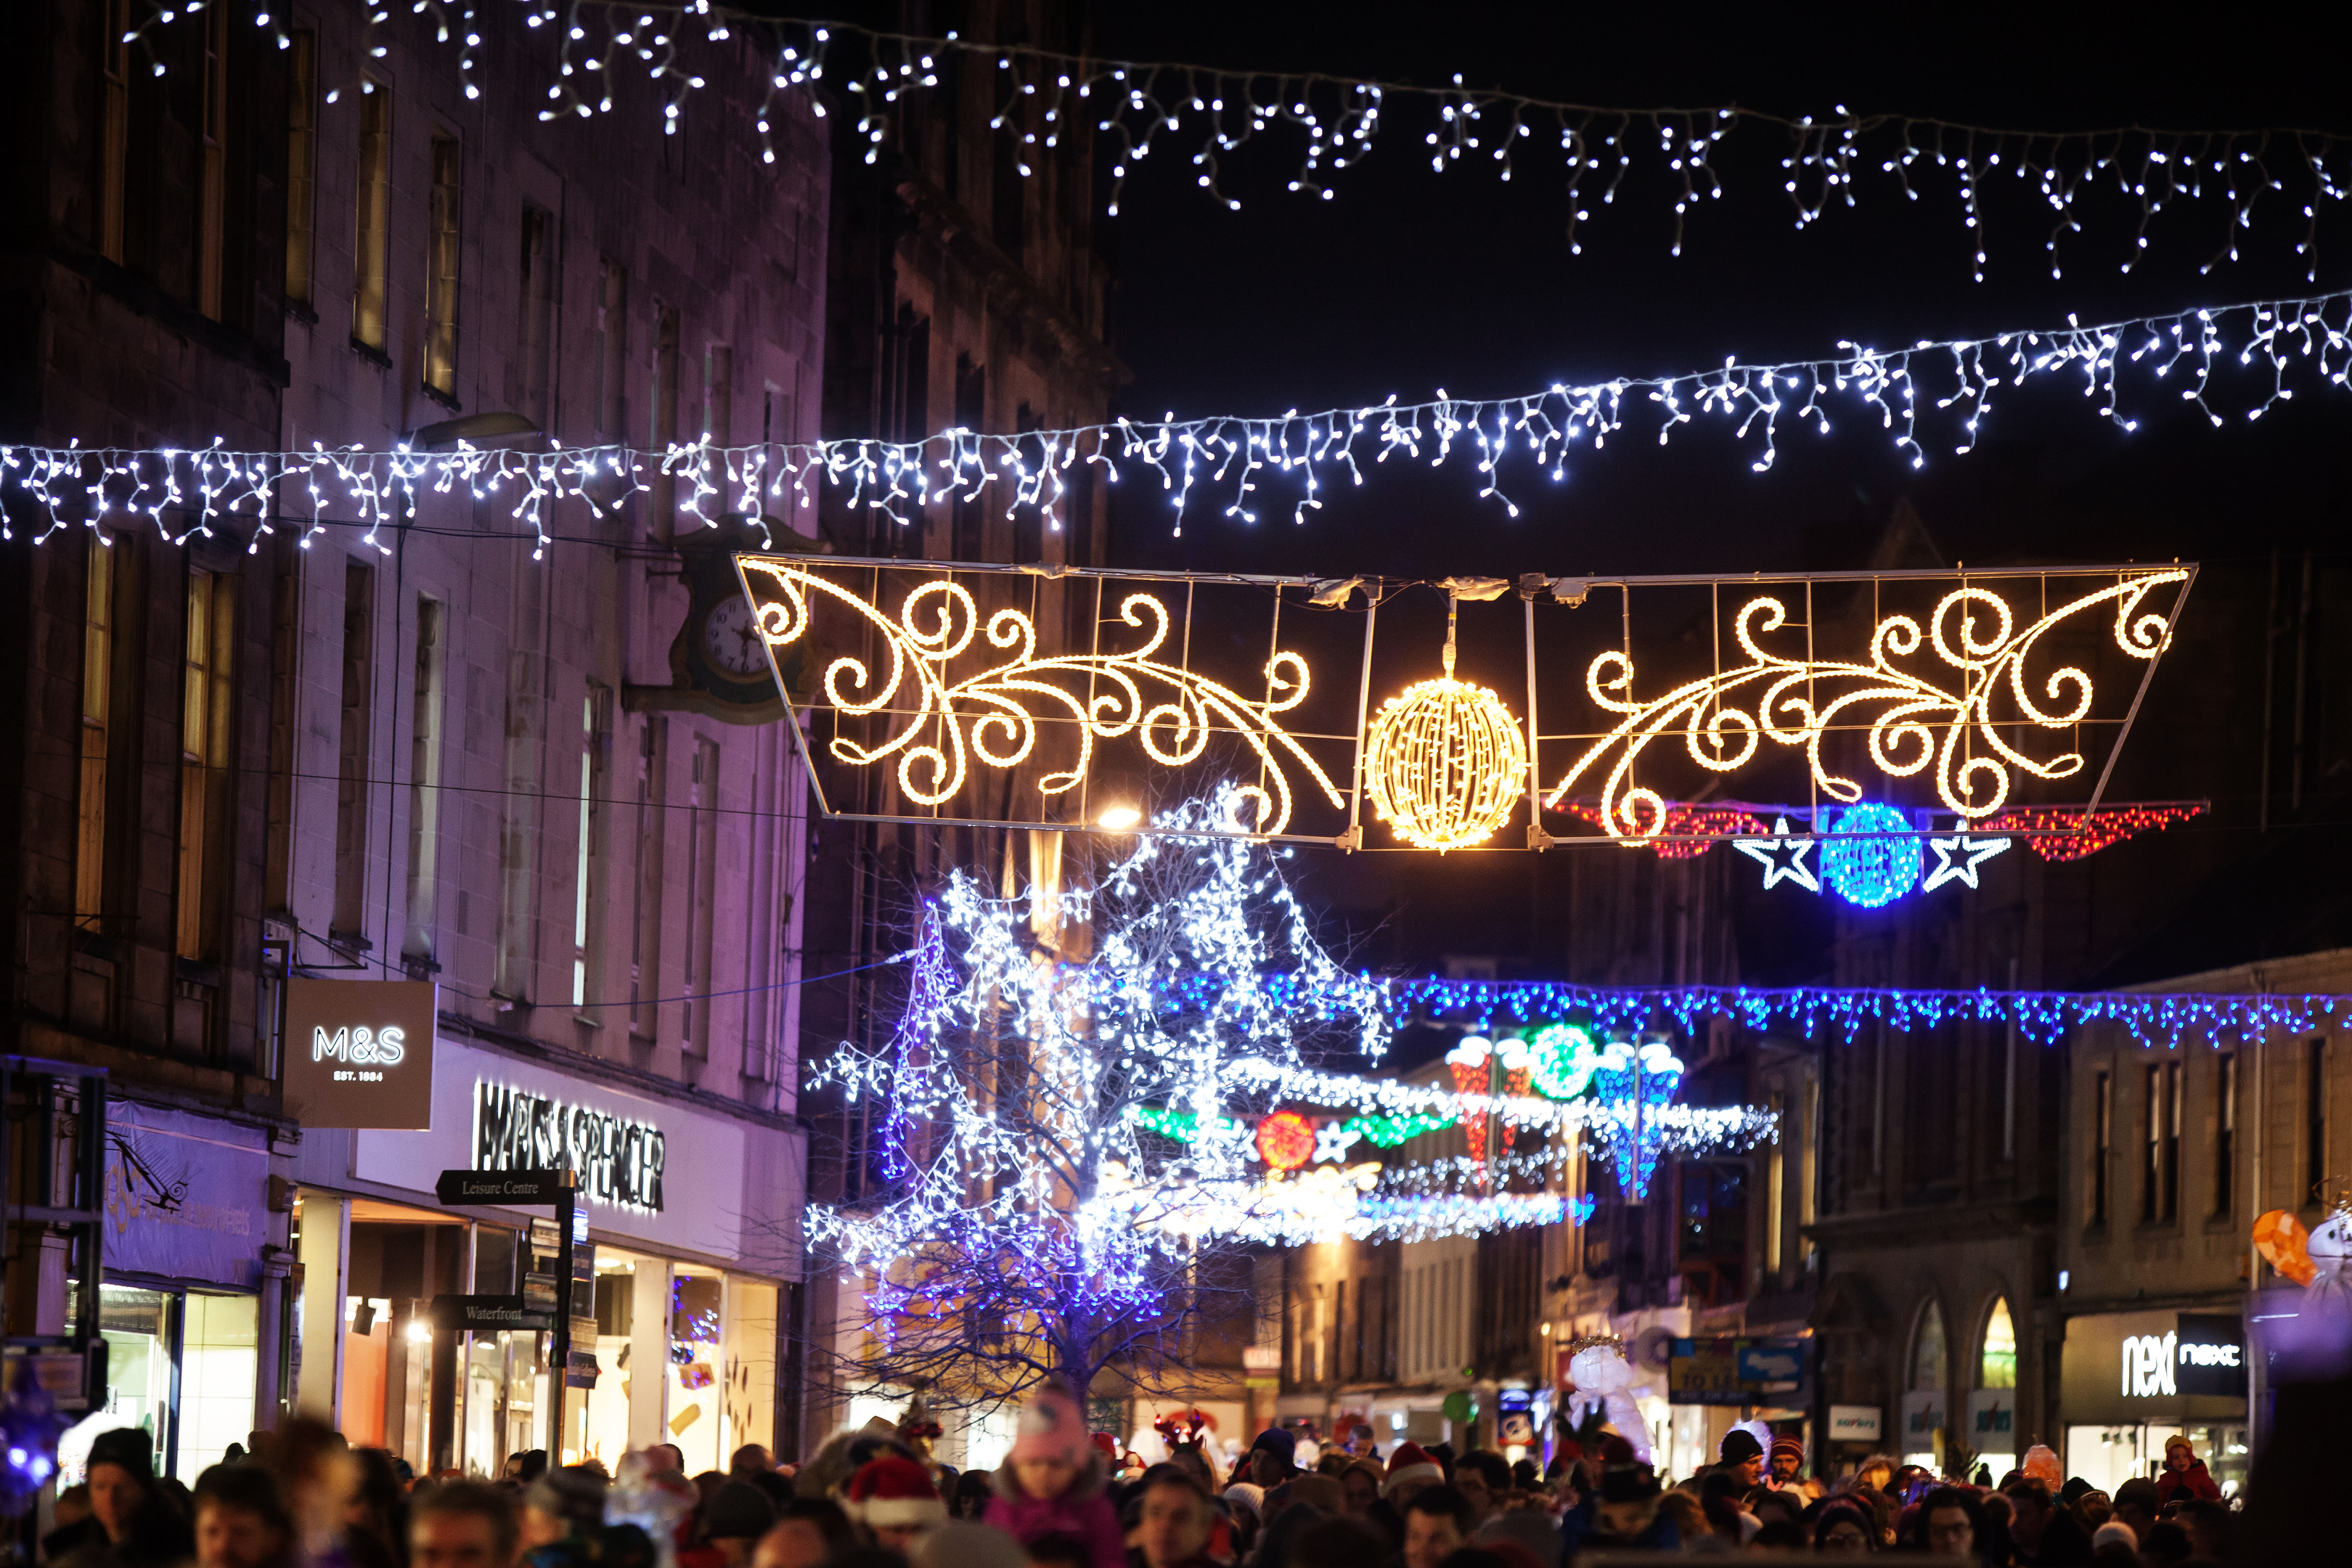 There will be more Kirkcaldy Christmas lights than previous years